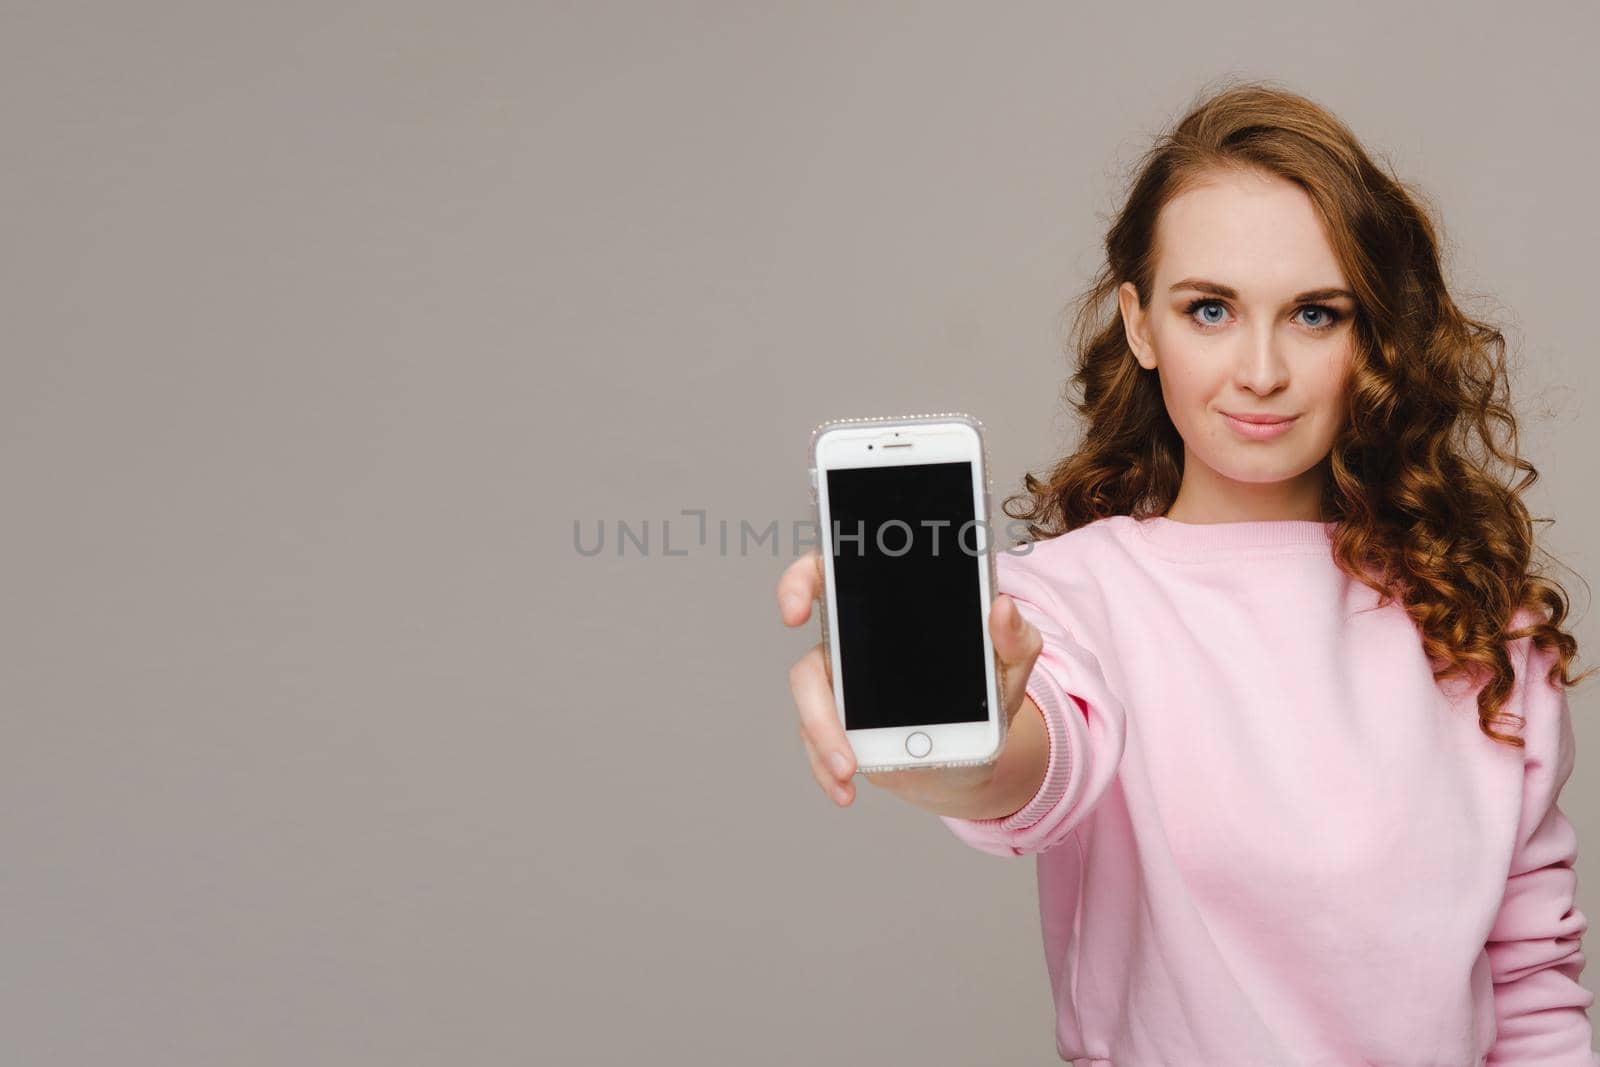 Fashionable girl with a smartphone on the background. Stands and shows the smartphone.